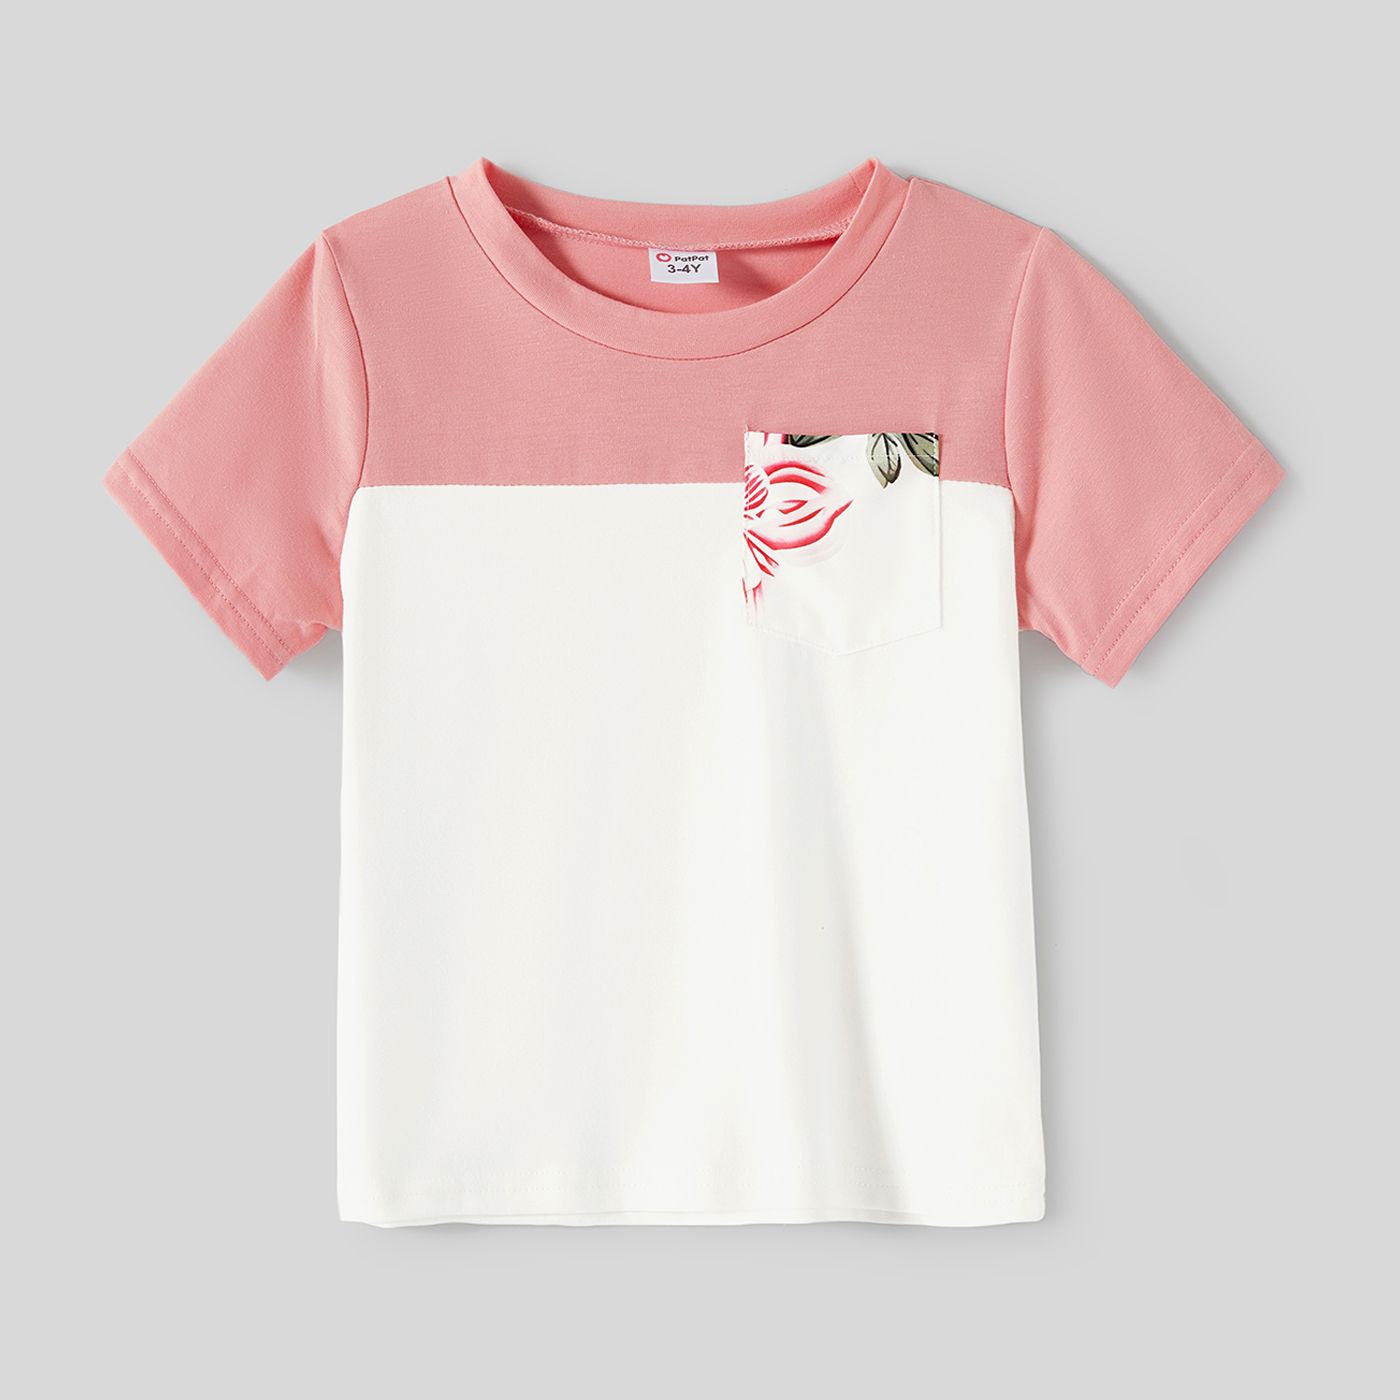 Family Matching Allover Floral Print Notched Neck Belted Dresses And Short-sleeve Colorblock T-shirts Sets